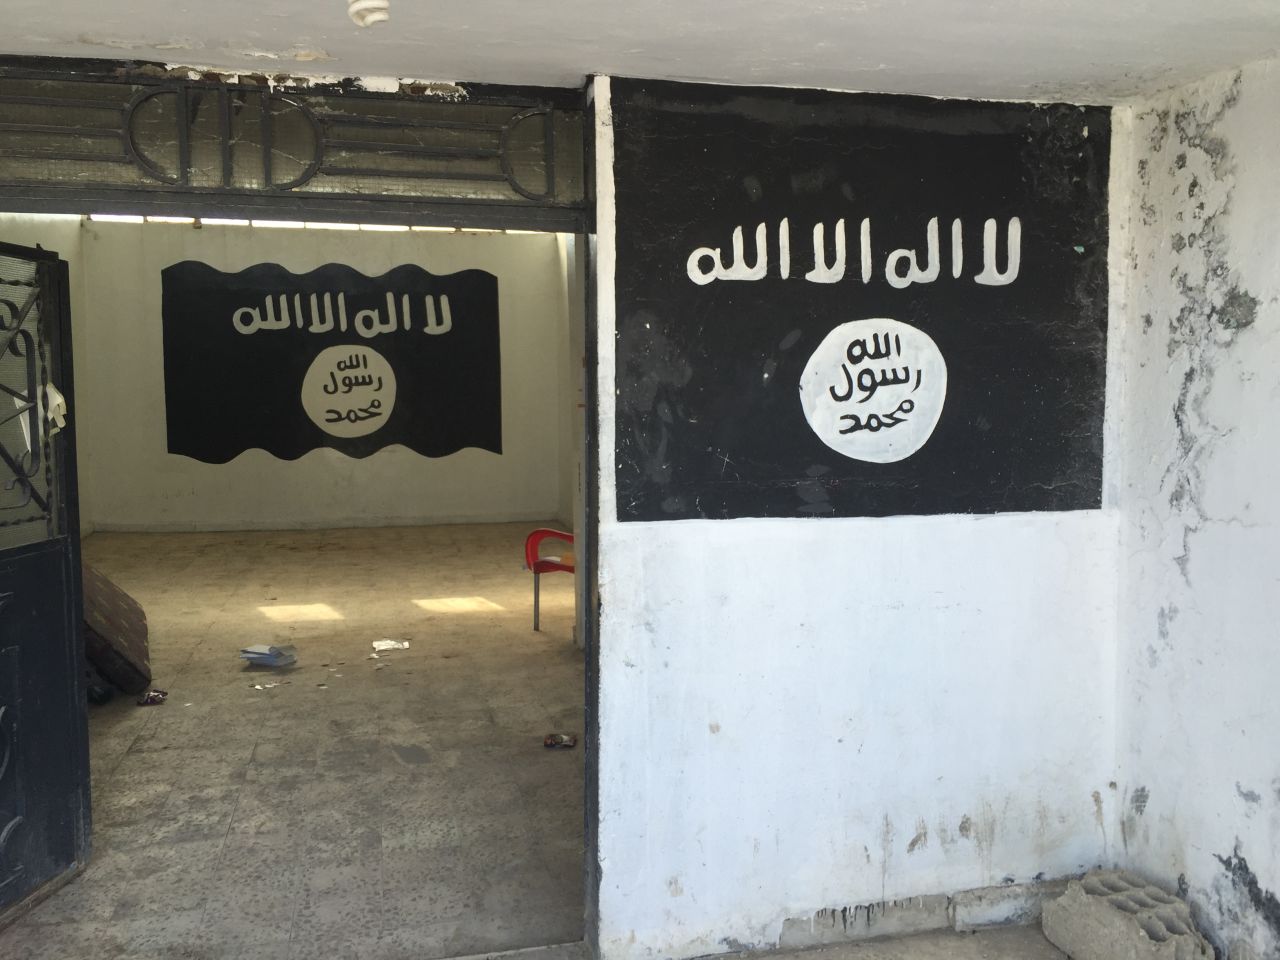 An ISIS security office in Tal Abyad, featuring the feared and hated ISIS flag painted on the walls. 